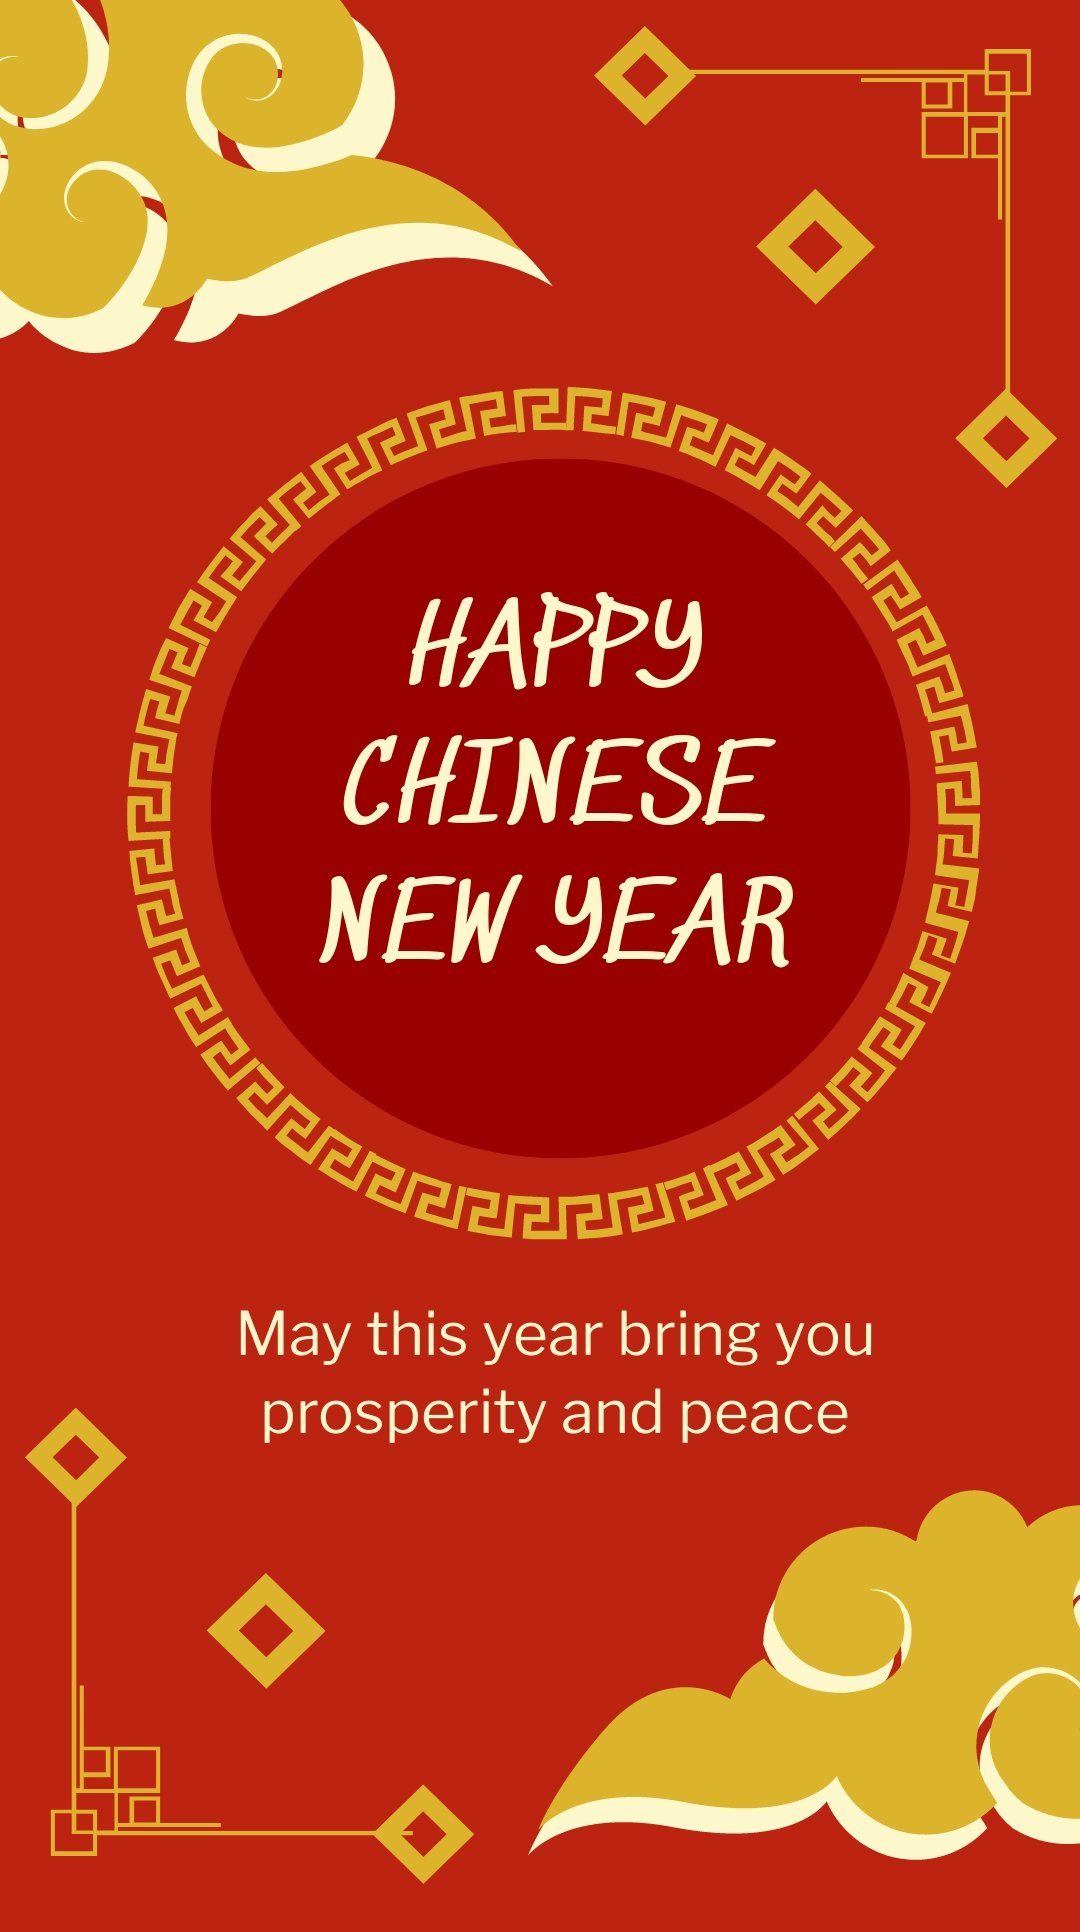 Vintage Chinese New Year Whatsapp Post Template